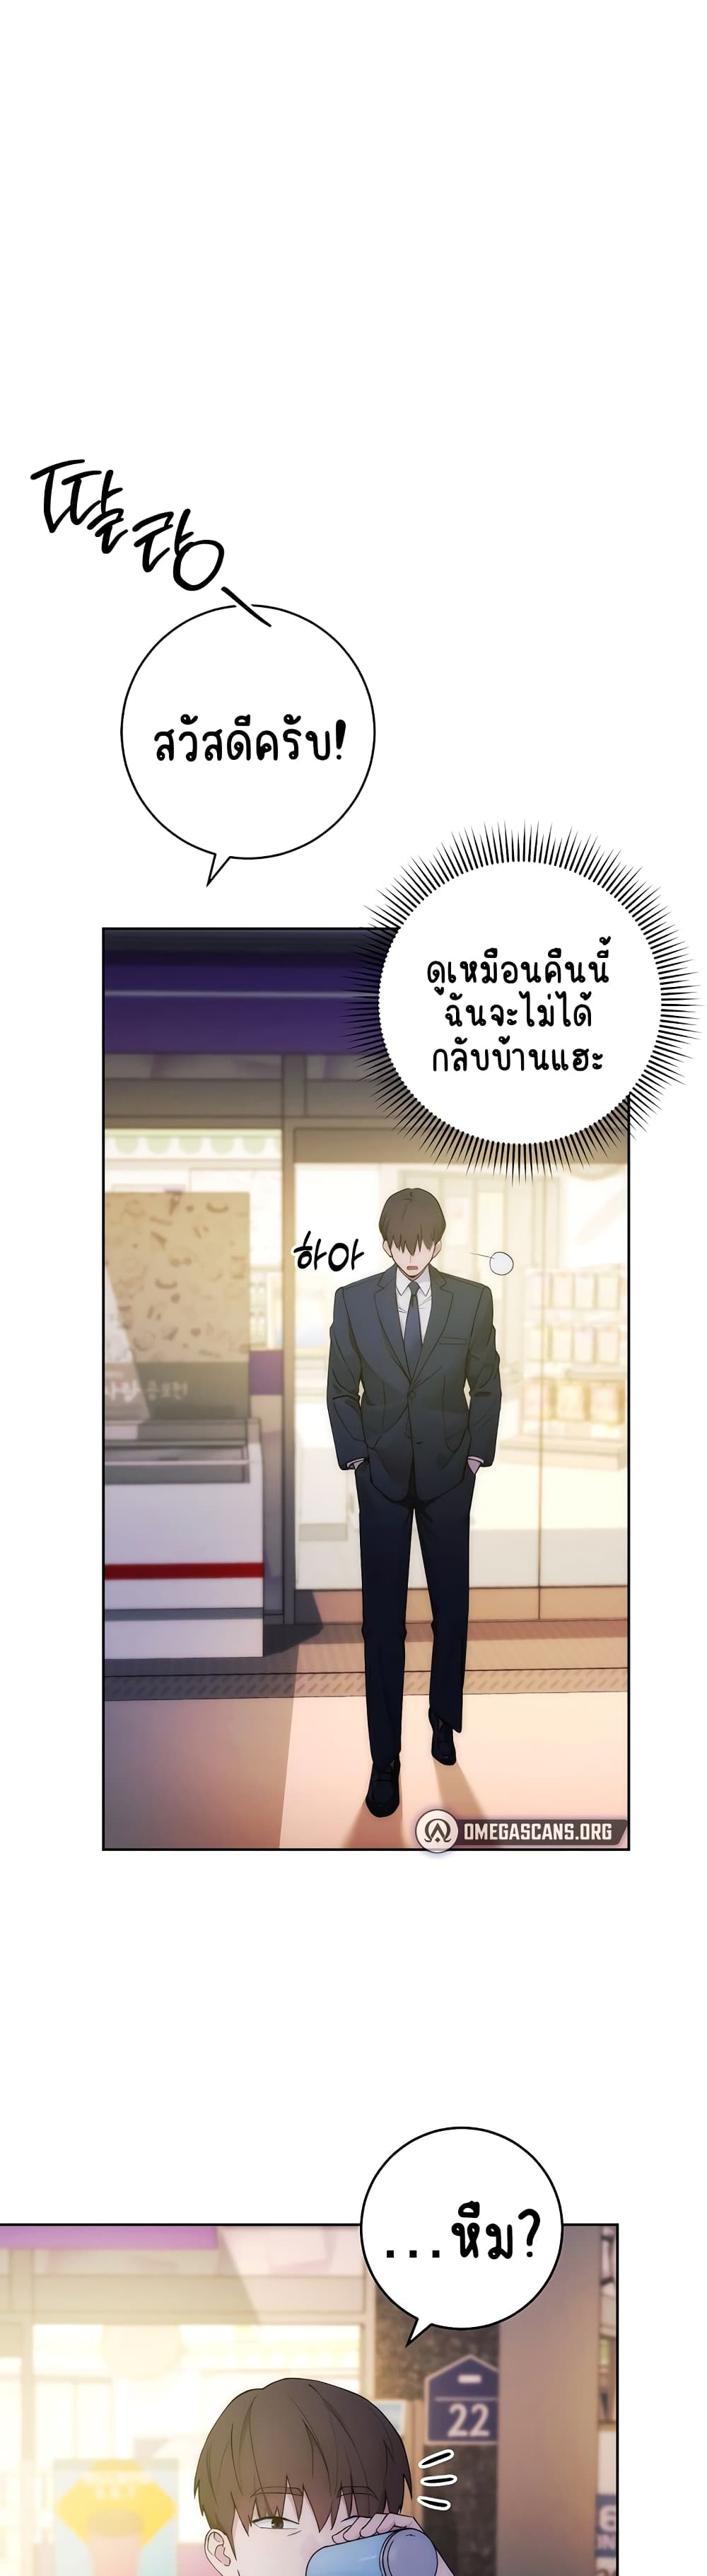 Outsider: The Invisible Man ตอนที่ 1 ภาพ 49